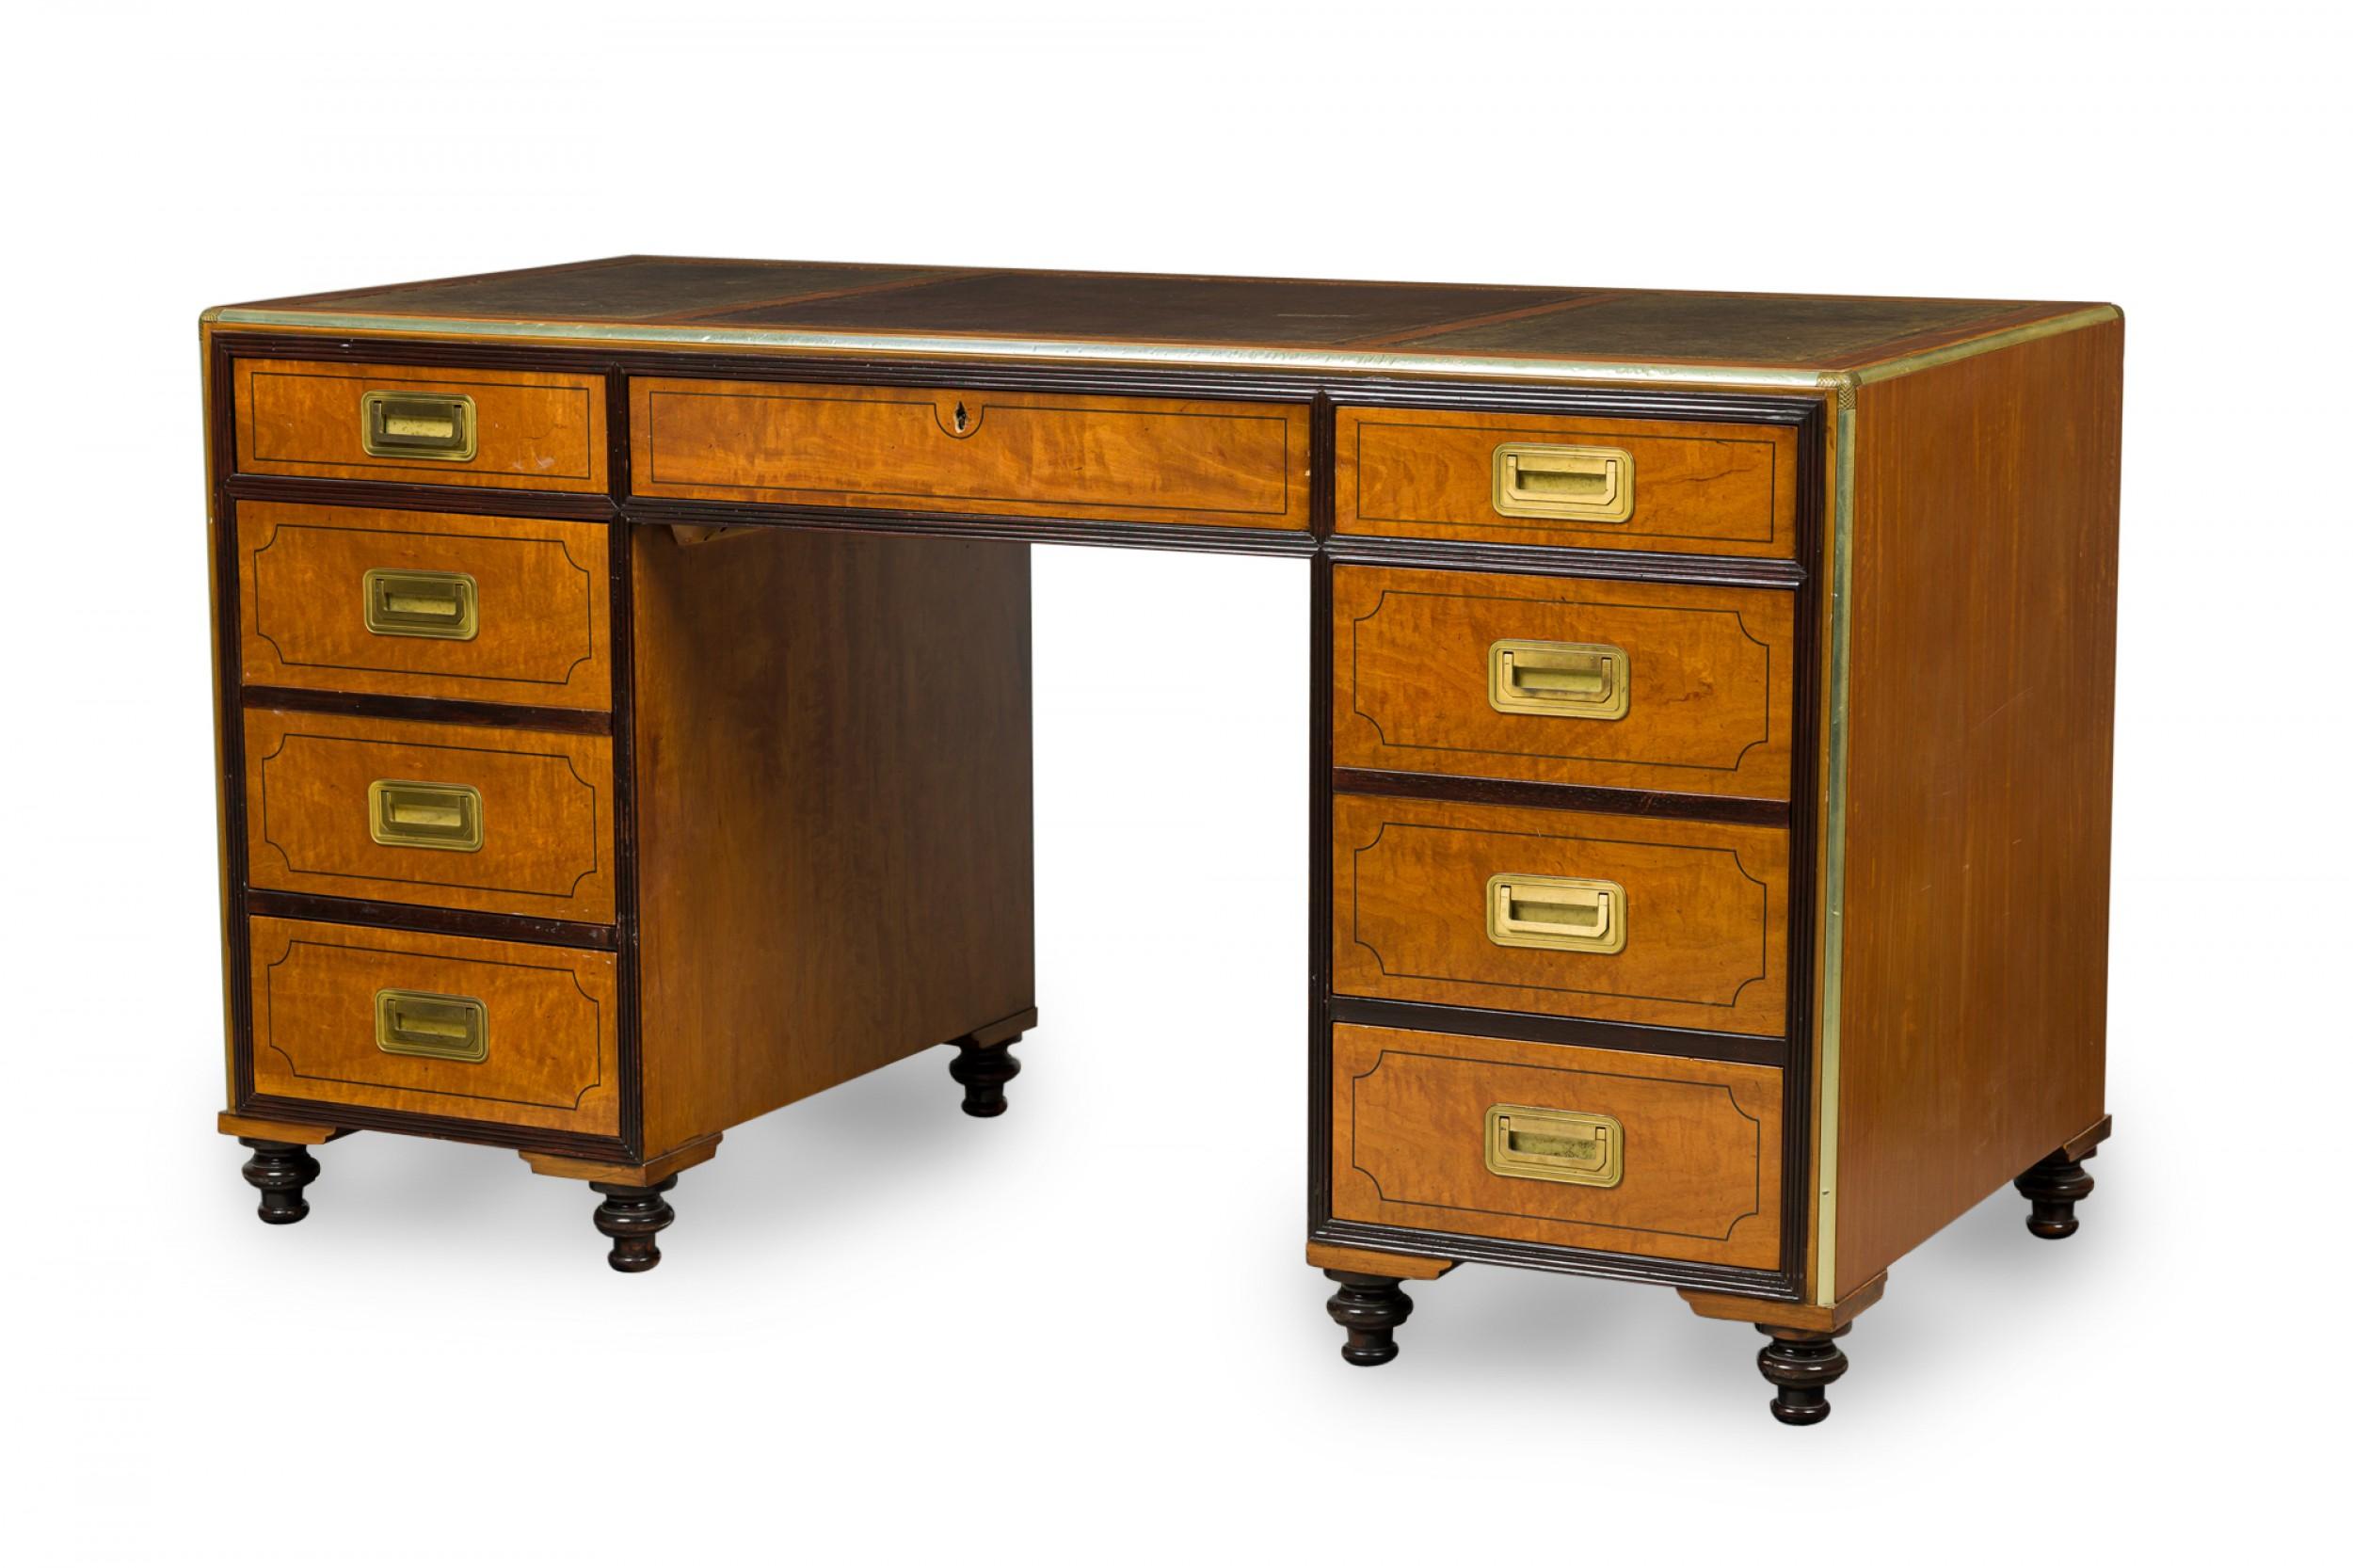 English Regency-Style (20th century) Campaign / kneehole desk with two cabinet columns with four drawers each having square inset brass drawer pulls and ebonized trim, and a central drawer, supporting a desktop with three brown leather insets.